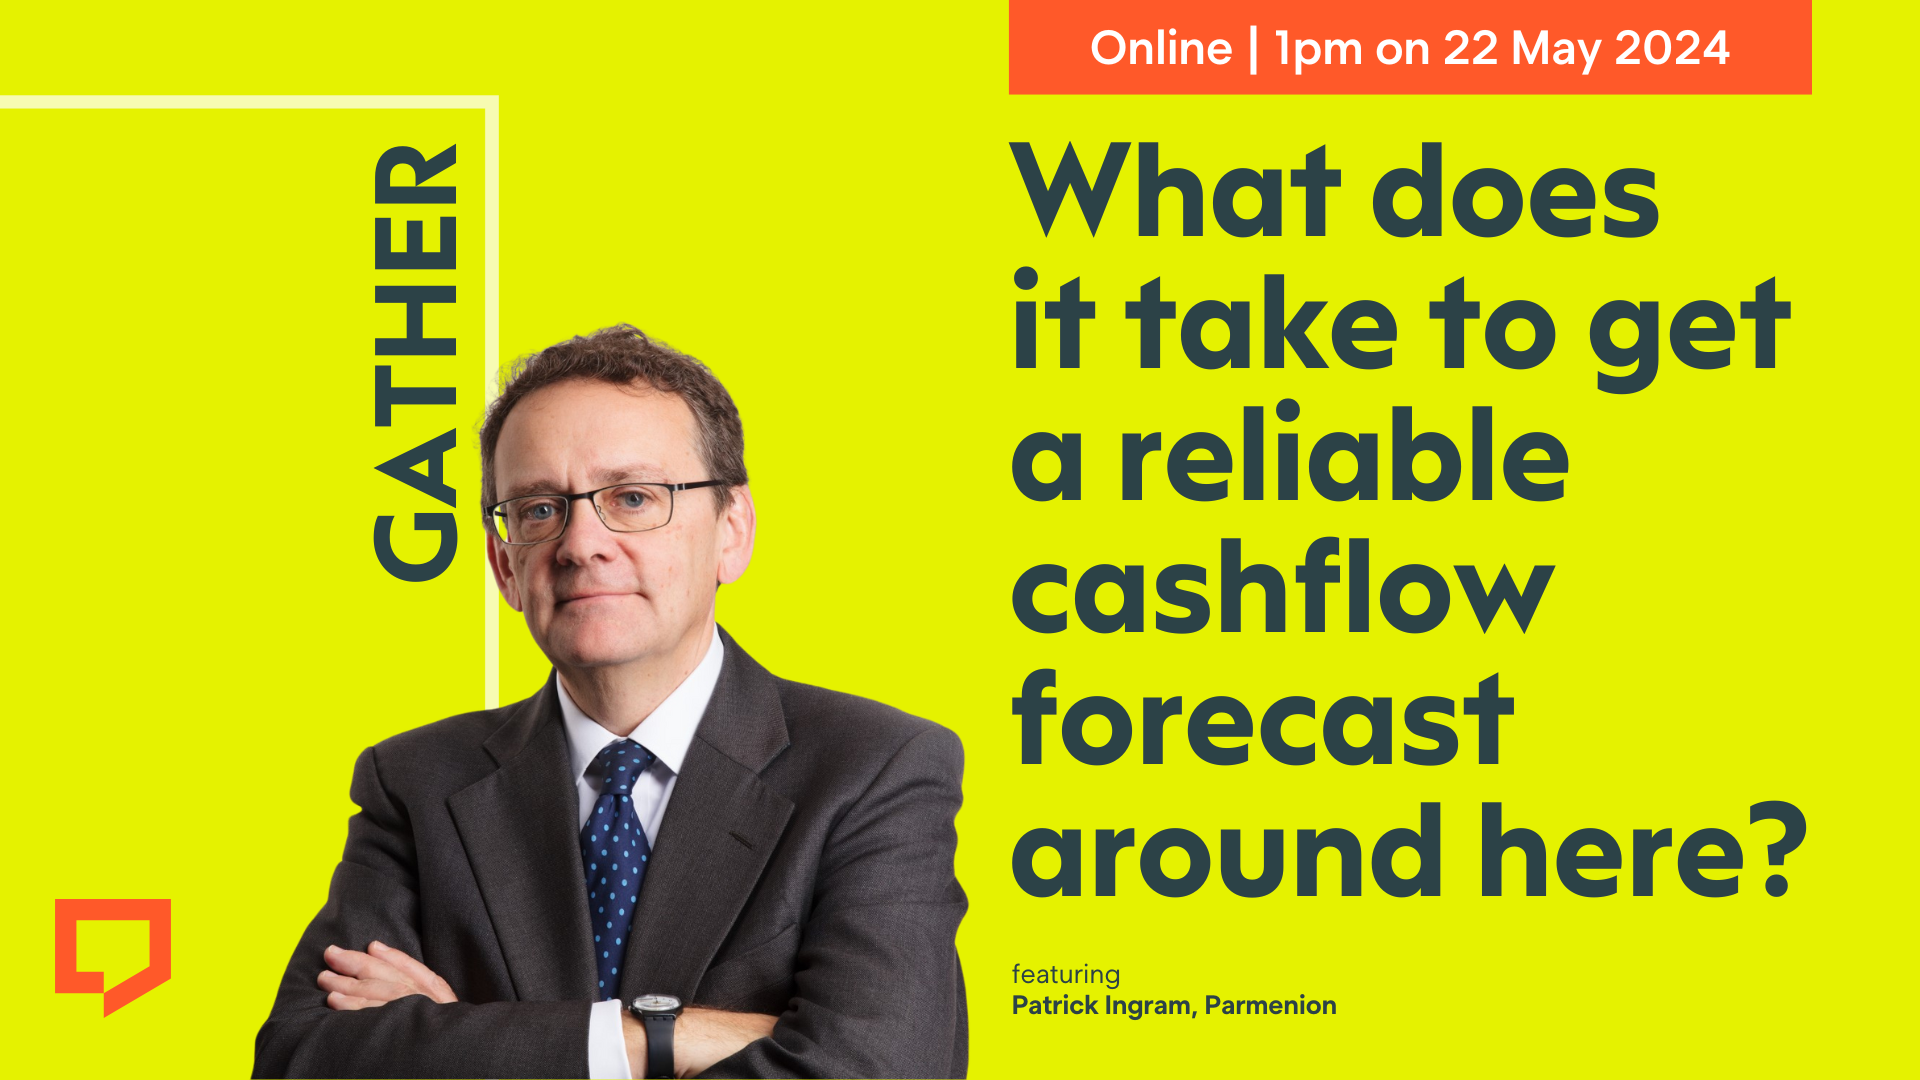 Gather online at 1pm on 22 May 2024. 'What does it take to get a reliable cashflow forecast around here?' featuring Patrick Ingram of Parmenion